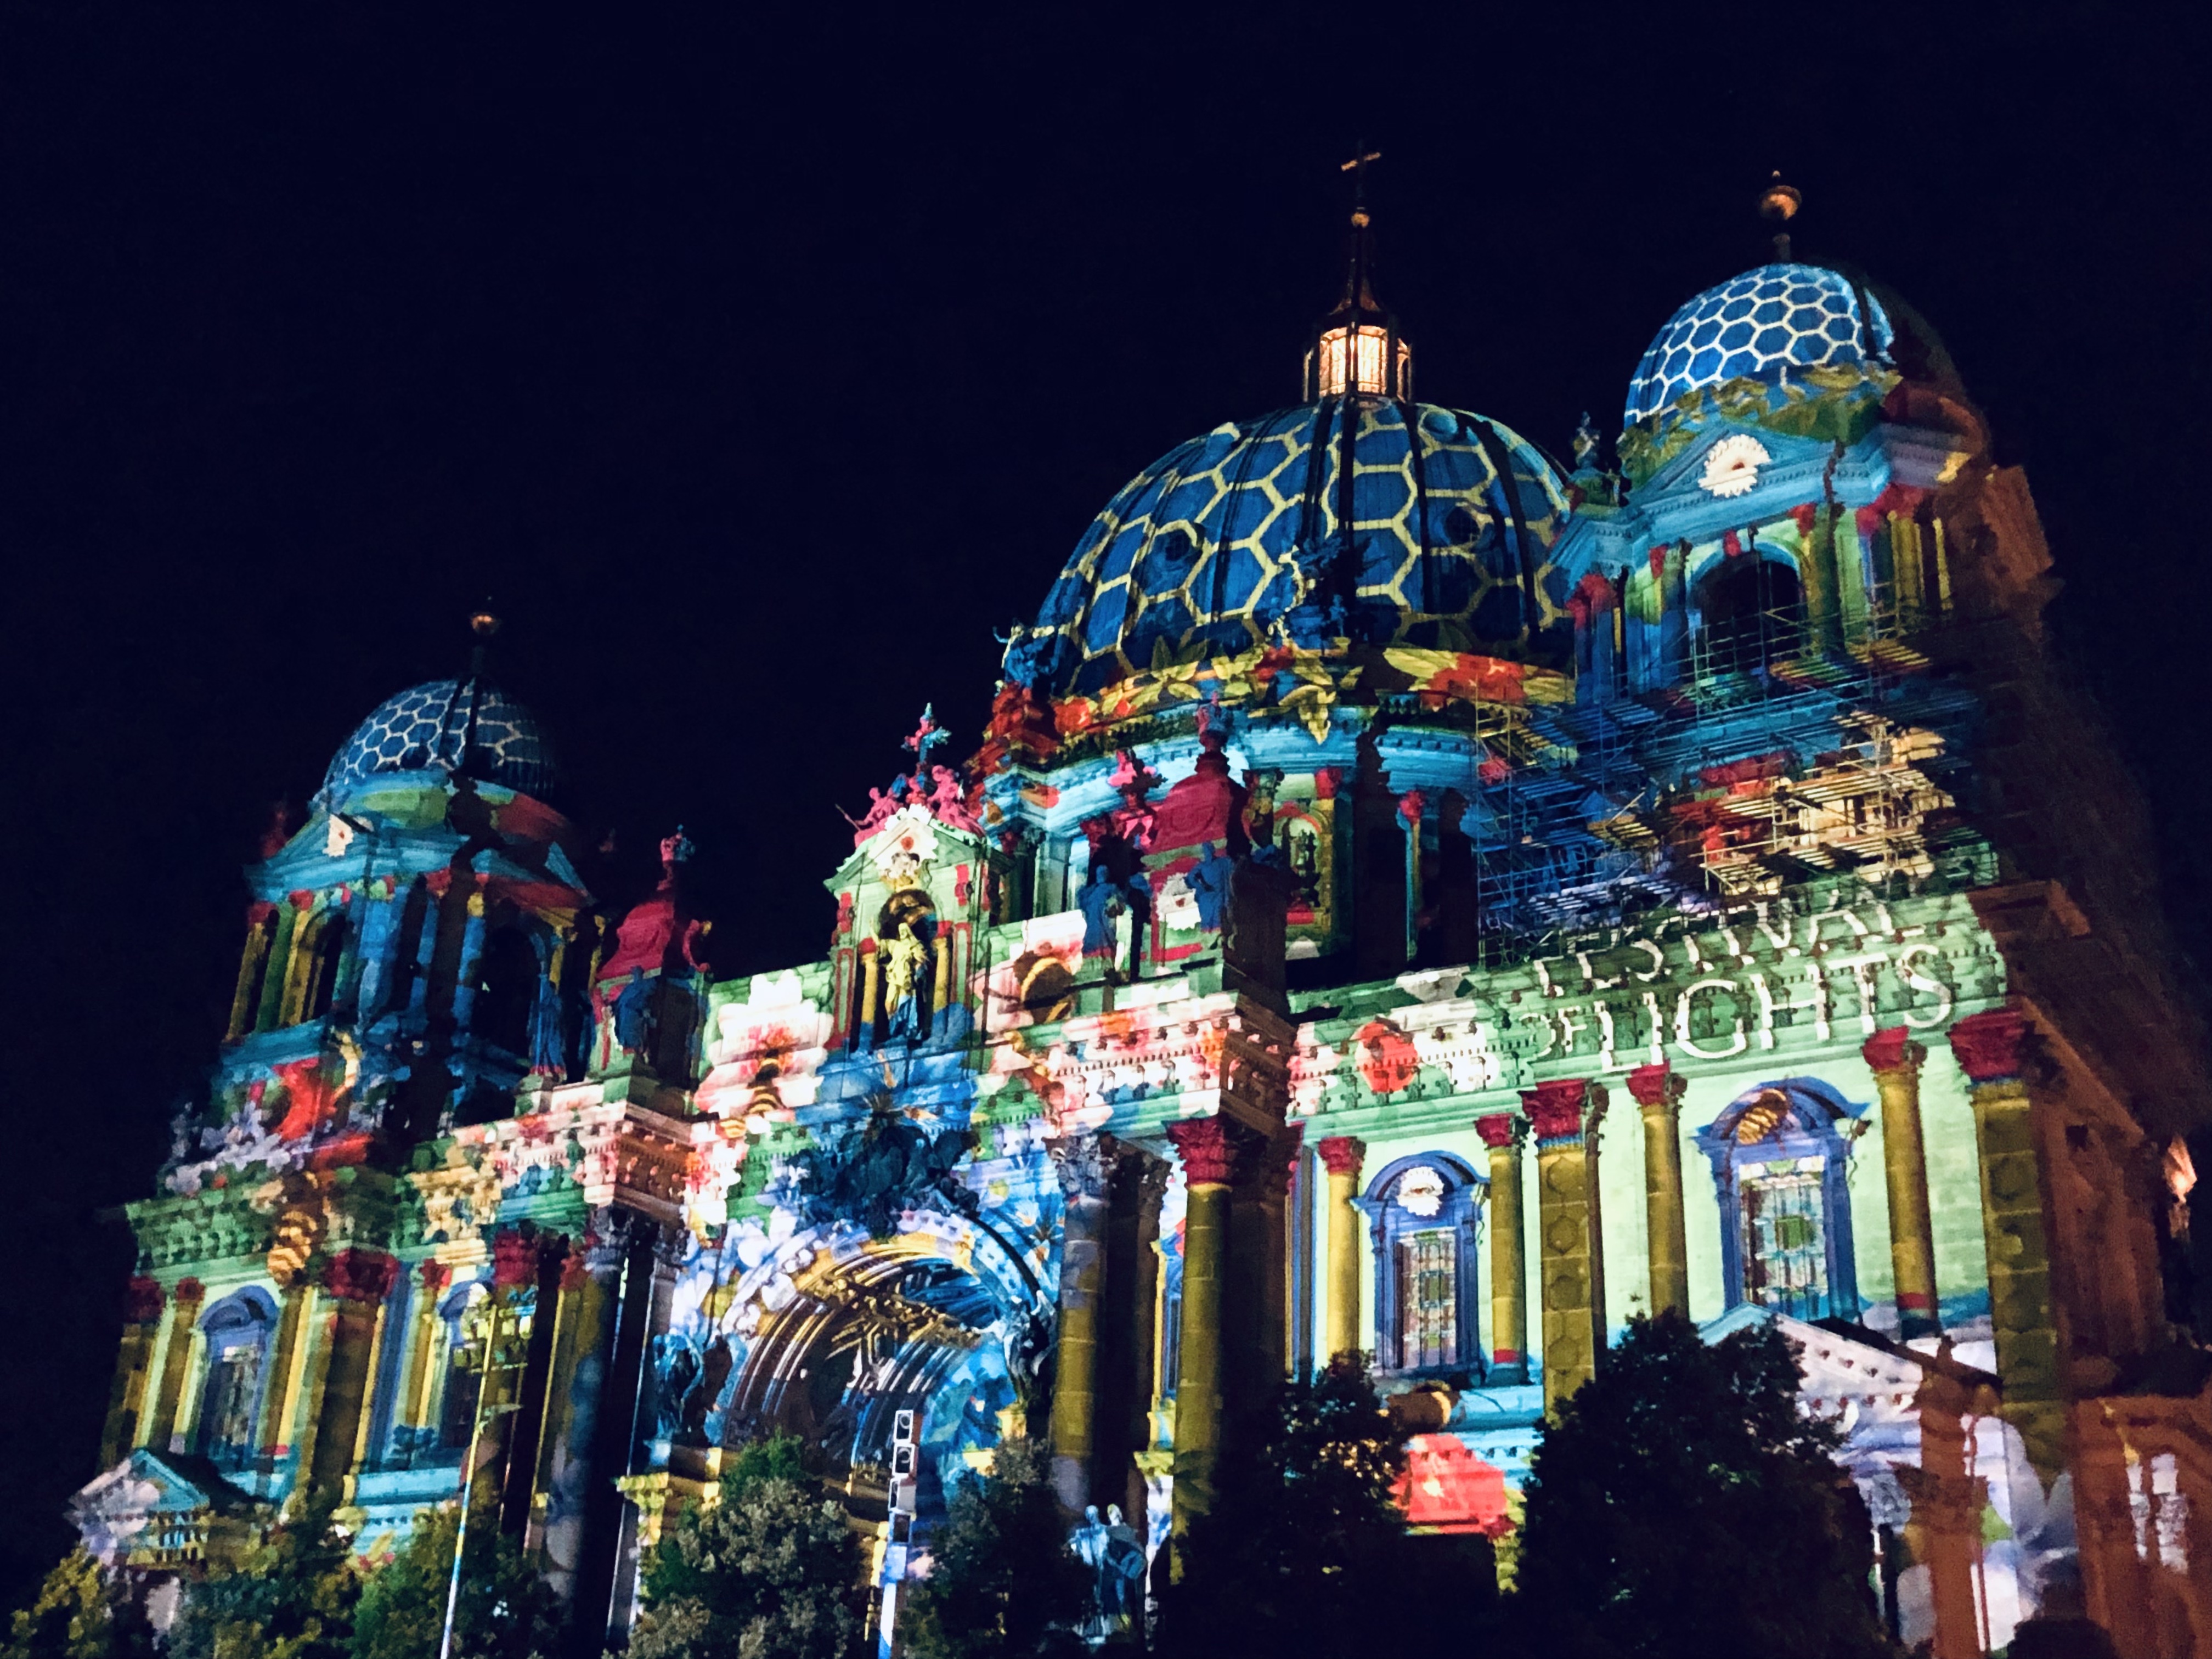 The Berliner Dom on Museum Island lit up in color during the annual Berlin Festival of Lights, September 2021. Our family enjoyed a walk through the city in the evening to see the light displays during the festival.